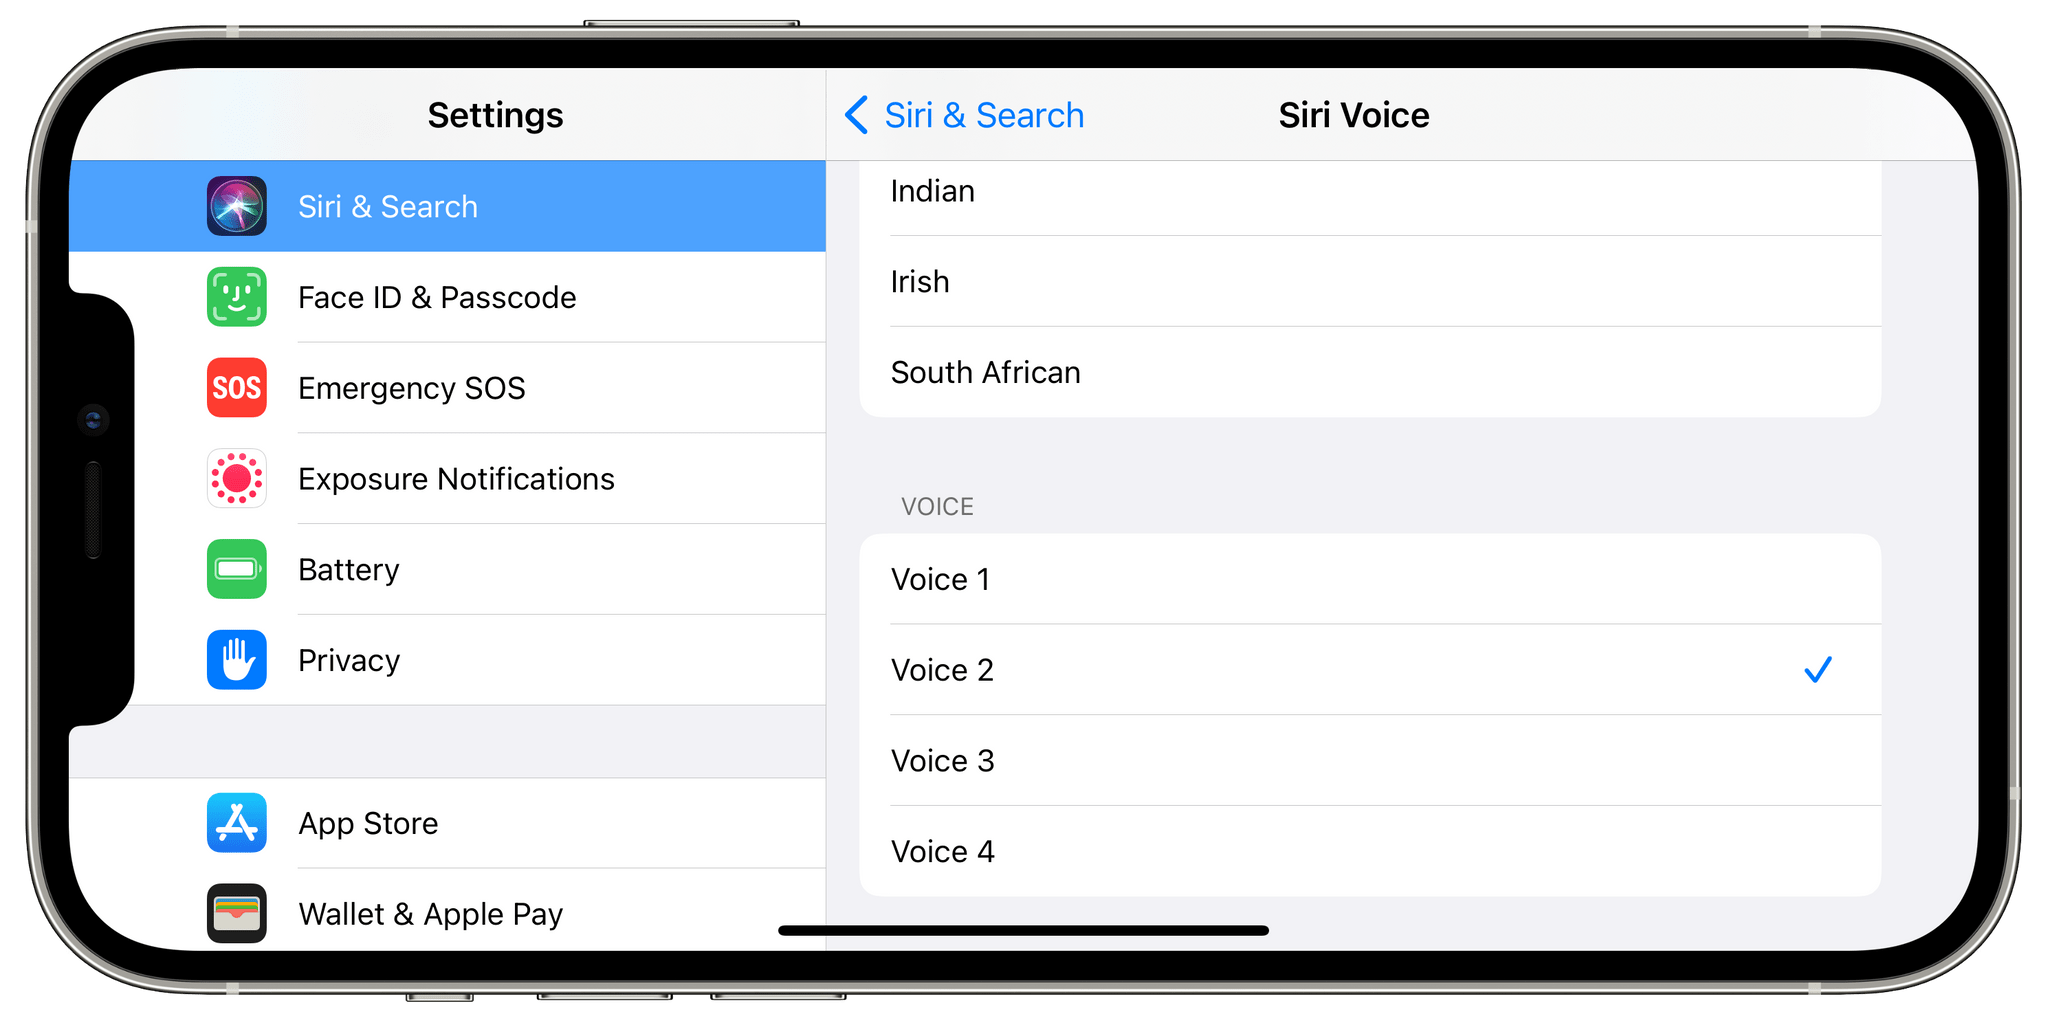 The updated settings for Siri's voices in iOS 14.5.